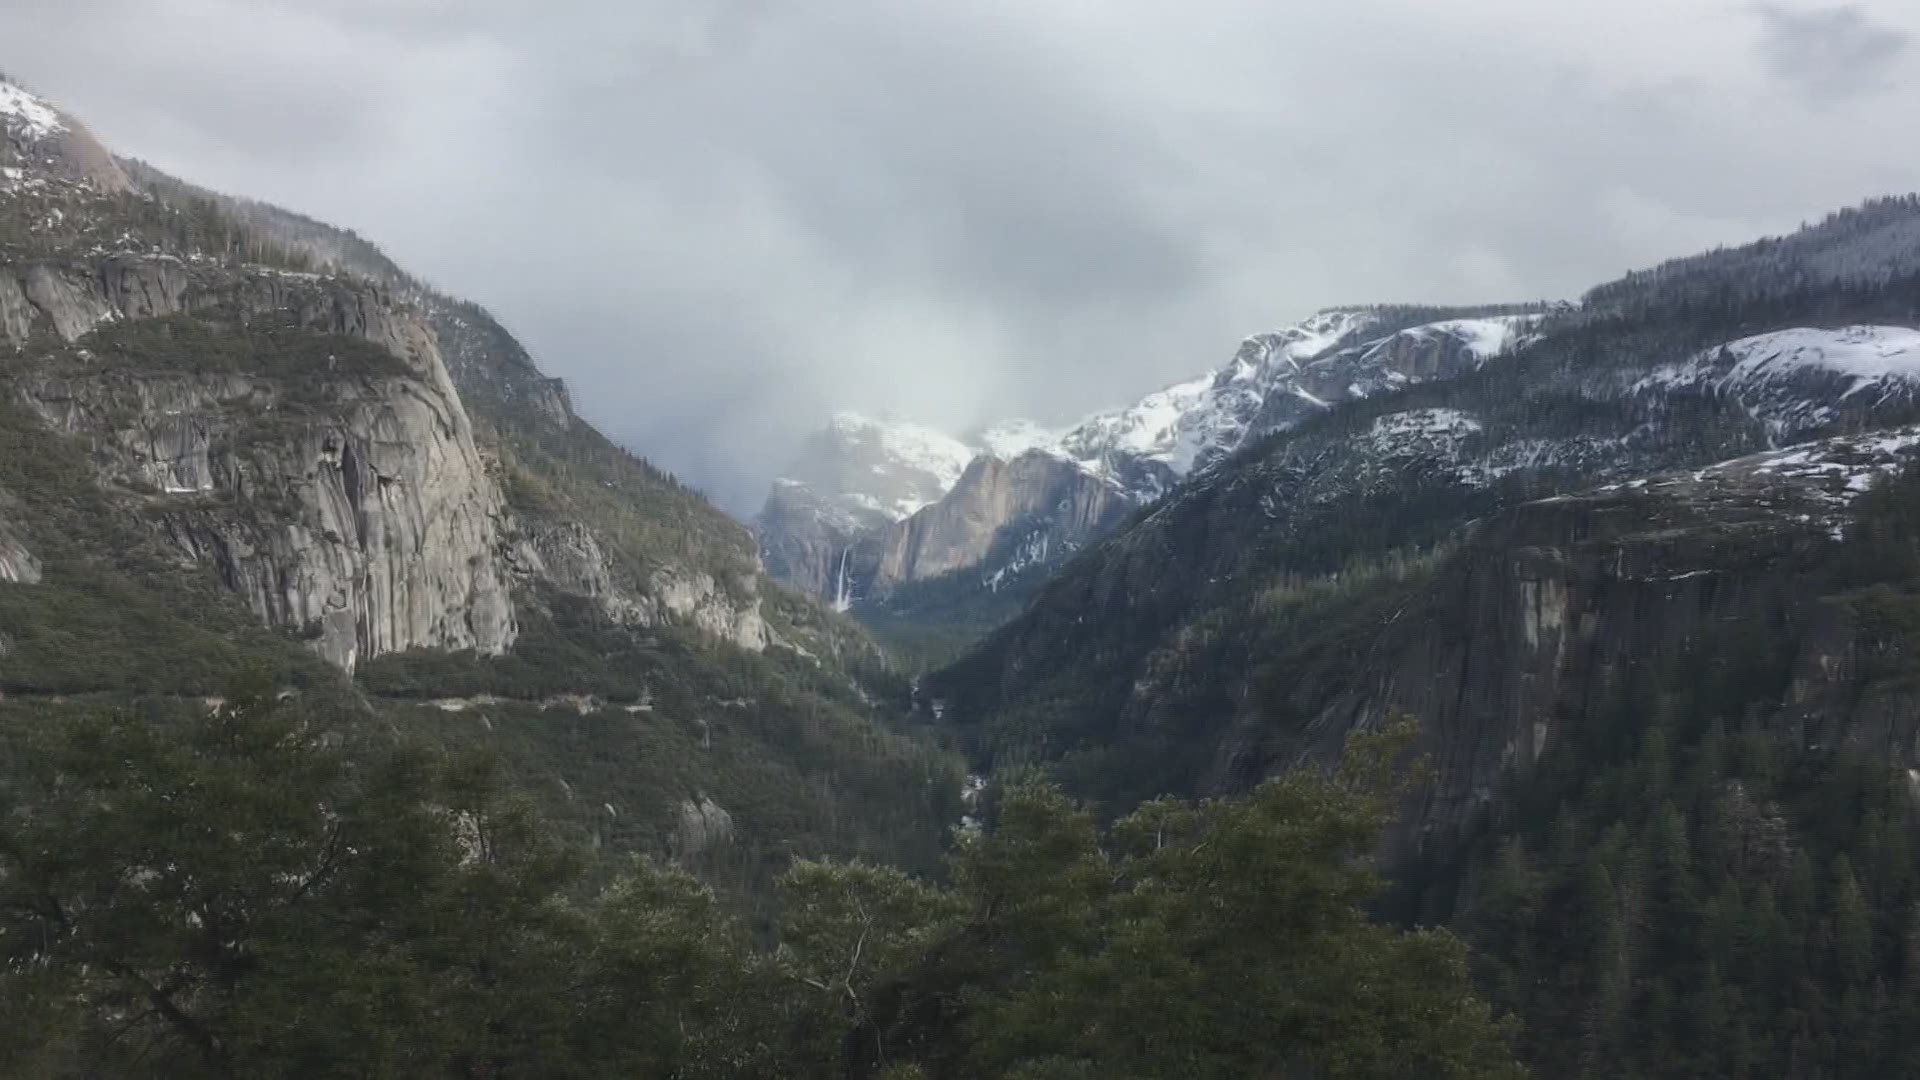 Winter in Yosemite - the time of year with the fewest park visitors. ABC10's Kurt Rivera journeyed through the snow to capture the park's beauty for our viewers.